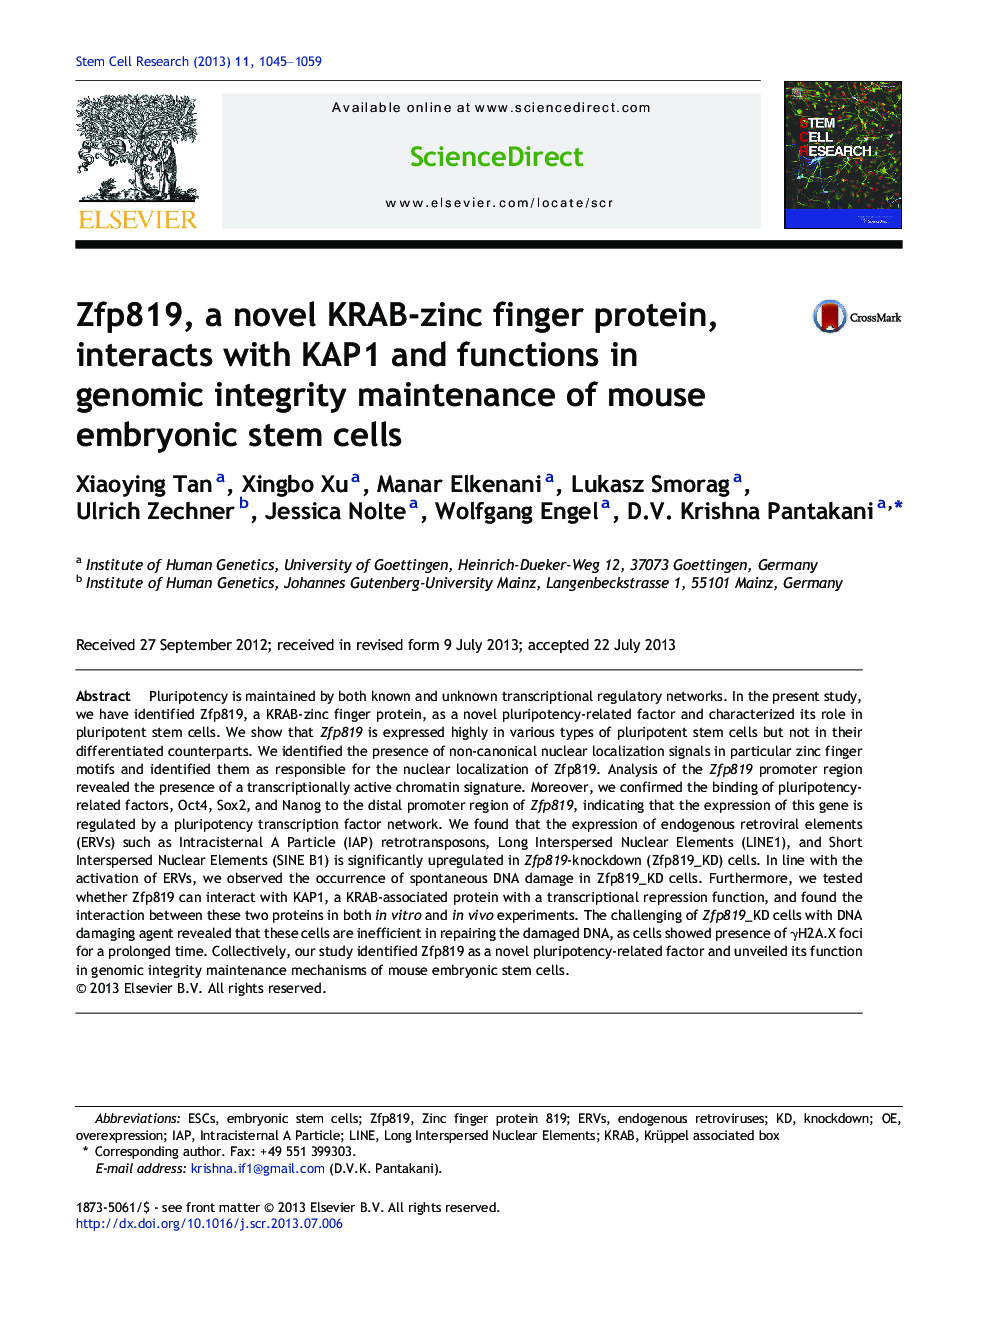 Zfp819, a novel KRAB-zinc finger protein, interacts with KAP1 and functions in genomic integrity maintenance of mouse embryonic stem cells